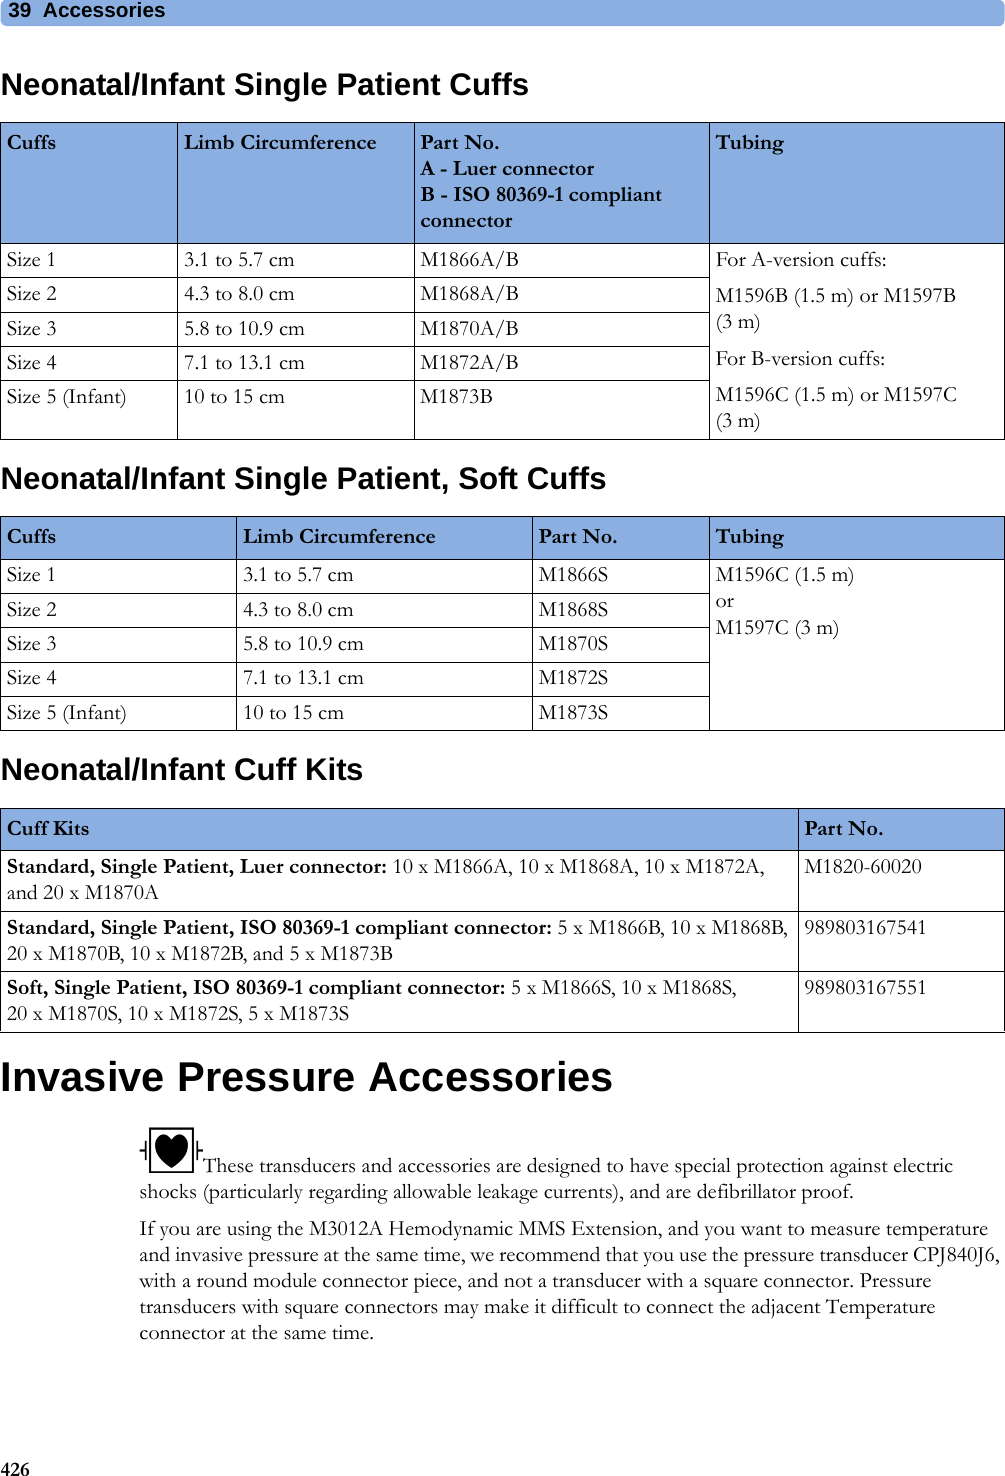 39 Accessories426Neonatal/Infant Single Patient CuffsNeonatal/Infant Single Patient, Soft CuffsNeonatal/Infant Cuff KitsInvasive Pressure AccessoriesThese transducers and accessories are designed to have special protection against electric shocks (particularly regarding allowable leakage currents), and are defibrillator proof.If you are using the M3012A Hemodynamic MMS Extension, and you want to measure temperature and invasive pressure at the same time, we recommend that you use the pressure transducer CPJ840J6, with a round module connector piece, and not a transducer with a square connector. Pressure transducers with square connectors may make it difficult to connect the adjacent Temperature connector at the same time.Cuffs Limb Circumference Part No.A - Luer connectorB - ISO 80369-1 compliant connectorTubingSize 1 3.1 to 5.7 cm M1866A/B For A-version cuffs:M1596B (1.5 m) or M1597B (3 m)For B-version cuffs:M1596C (1.5 m) or M1597C (3 m)Size 2 4.3 to 8.0 cm M1868A/BSize 3 5.8 to 10.9 cm M1870A/BSize 4 7.1 to 13.1 cm M1872A/BSize 5 (Infant) 10 to 15 cm M1873BCuffs Limb Circumference Part No. TubingSize 1 3.1 to 5.7 cm M1866S M1596C (1.5 m) orM1597C (3 m)Size 2 4.3 to 8.0 cm M1868SSize 3 5.8 to 10.9 cm M1870SSize 4 7.1 to 13.1 cm M1872SSize 5 (Infant) 10 to 15 cm M1873SCuff Kits Part No.Standard, Single Patient, Luer connector: 10 x M1866A, 10 x M1868A, 10 x M1872A, and 20 x M1870AM1820-60020Standard, Single Patient, ISO 80369-1 compliant connector: 5 x M1866B, 10 x M1868B, 20 x M1870B, 10 x M1872B, and 5 x M1873B989803167541Soft, Single Patient, ISO 80369-1 compliant connector: 5 x M1866S, 10 x M1868S, 20 x M1870S, 10 x M1872S, 5 x M1873S989803167551